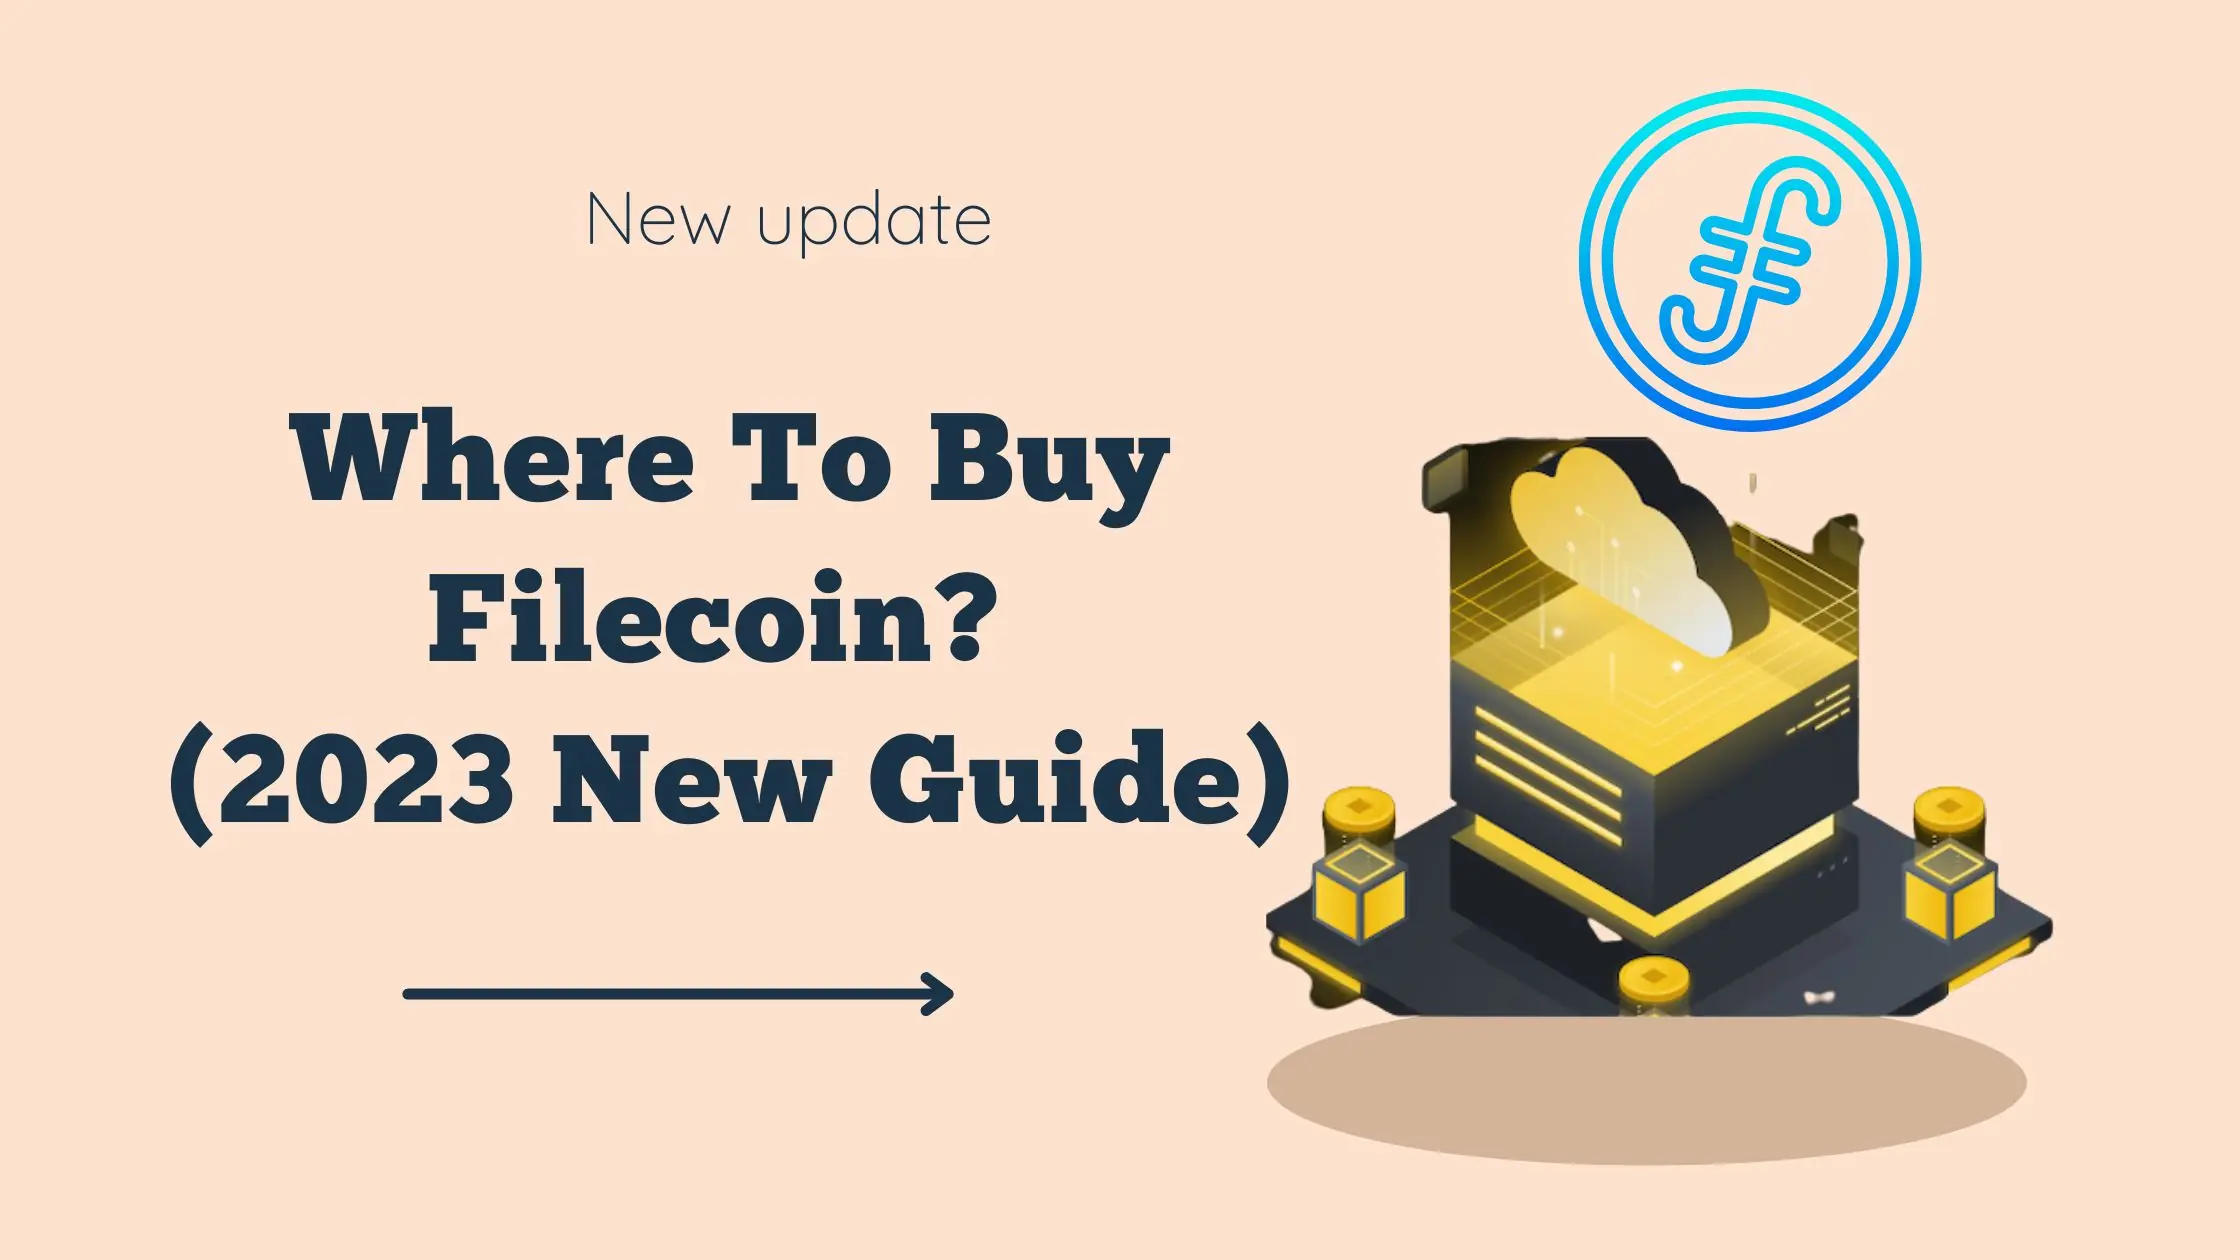 Where To Buy Filecoin? (2023 New Guide)